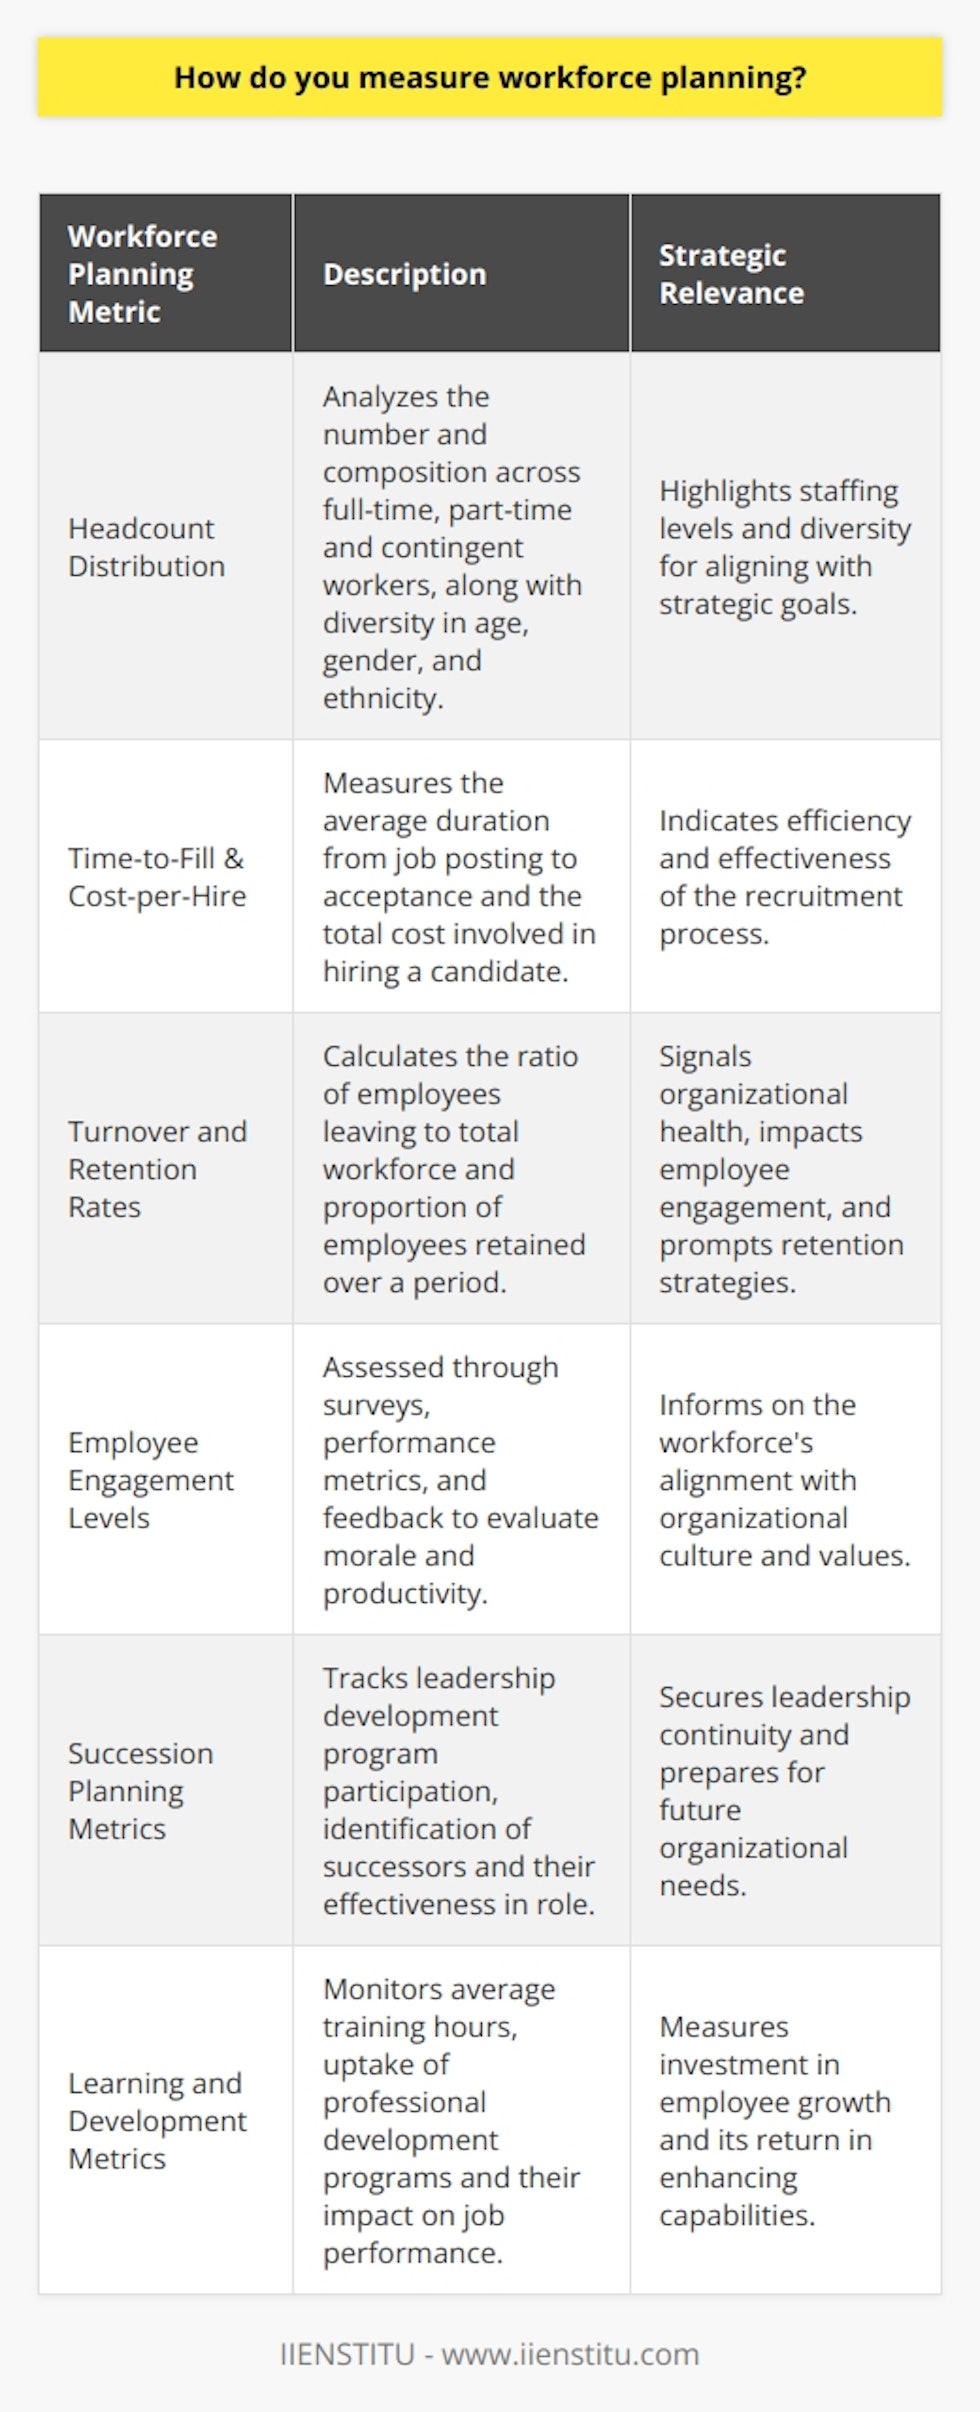 Workforce Planning Metrics: A Pathway to Organizational GrowthWorkforce planning plays a vital role in the strategic development and sustainment of organizations. To gauge the efficacy of workforce planning, we need to delve into metrics that offer actionable insights and enable data-driven decisions. Here's a selection of metrics that stand as the pillars of a robust workforce planning strategy.Workforce Composition and DistributionUnderstanding the current composition of the workforce is foundational to effective planning. Analyzing headcount, including full-time, part-time, and contingent workers, provides a clear picture. Beyond mere numbers, examining the diversity of the workforce across age, gender, and ethnicity, as well as the spread of talent across functions, can highlight areas that may need attention to support strategic goals.Hiring Process EfficiencyTo establish a well-tuned recruitment engine, measuring hiring efficiency is key. Metrics such as the average time it takes to fill a vacancy (time-to-fill) and the total expenditures involved in hiring a candidate (cost-per-hire) are imperative. Beyond these, assessing the quality of hire - often through performance and retention rates of new hires - can indicate the long-term value brought by recruitment efforts.Stability Index: Turnover and RetentionTurnover rates signify how often employees are leaving the organization. It's a signal of organizational health that often prompts leadership to probe into working conditions, growth opportunities, and compensation. Retention rates shine a light on the effectiveness of employee engagement strategies and can lead to initiatives aimed at creating a more compelling employee value proposition.Pulse of Organizational Commitment: Employee EngagementEngagement levels serve as a proxy for employee morale, productivity, and likelihood to stay with the company. Evaluating engagement through surveys, performance metrics, and informal feedback channels helps pinpoint specific domains or teams where the culture and processes may need refinement to boost overall workforce productivity and align with organizational values.Blueprint for Continuity: Succession PlanningReadiness for leadership and critical roles is crucial for business continuity. Tracking the number of employees in leadership development programs, the percentage of critical roles with identified successors, and the effectiveness of those successors once in role, can illuminate the robustness of the organization's succession planning.Skill Development and LearningThe growth of an organization is inextricably linked to the growth of its employees. Tangible metrics such as average training and development hours per employee, uptake, and completion rates of professional development programs, alongside the qualitative assessment of such training on job performance, can underscore the value of investment in human capital development.Efficient workforce planning requires a blend of qualitative and quantitative measures, balancing hard data with insights derived from employee feedback and behavior observations. By systematically monitoring and adjusting plans based on these metrics, organizations can carve a trajectory that not only meets the immediate needs but also fosters long-term, sustainable growth.